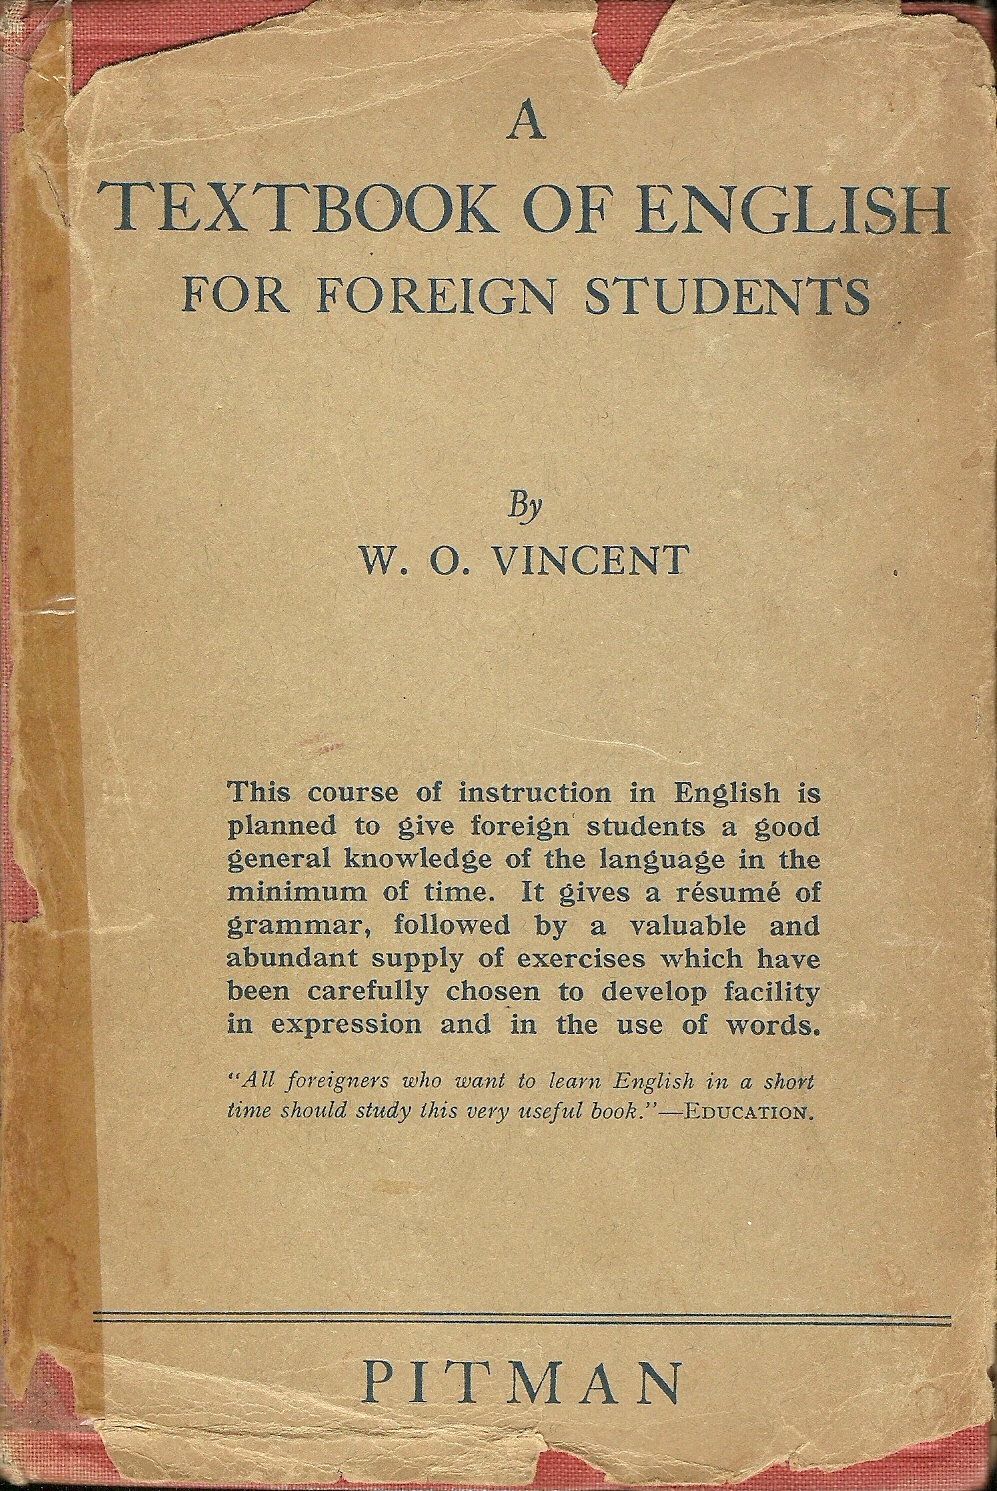 A Textbook of English - W. O. Vincent